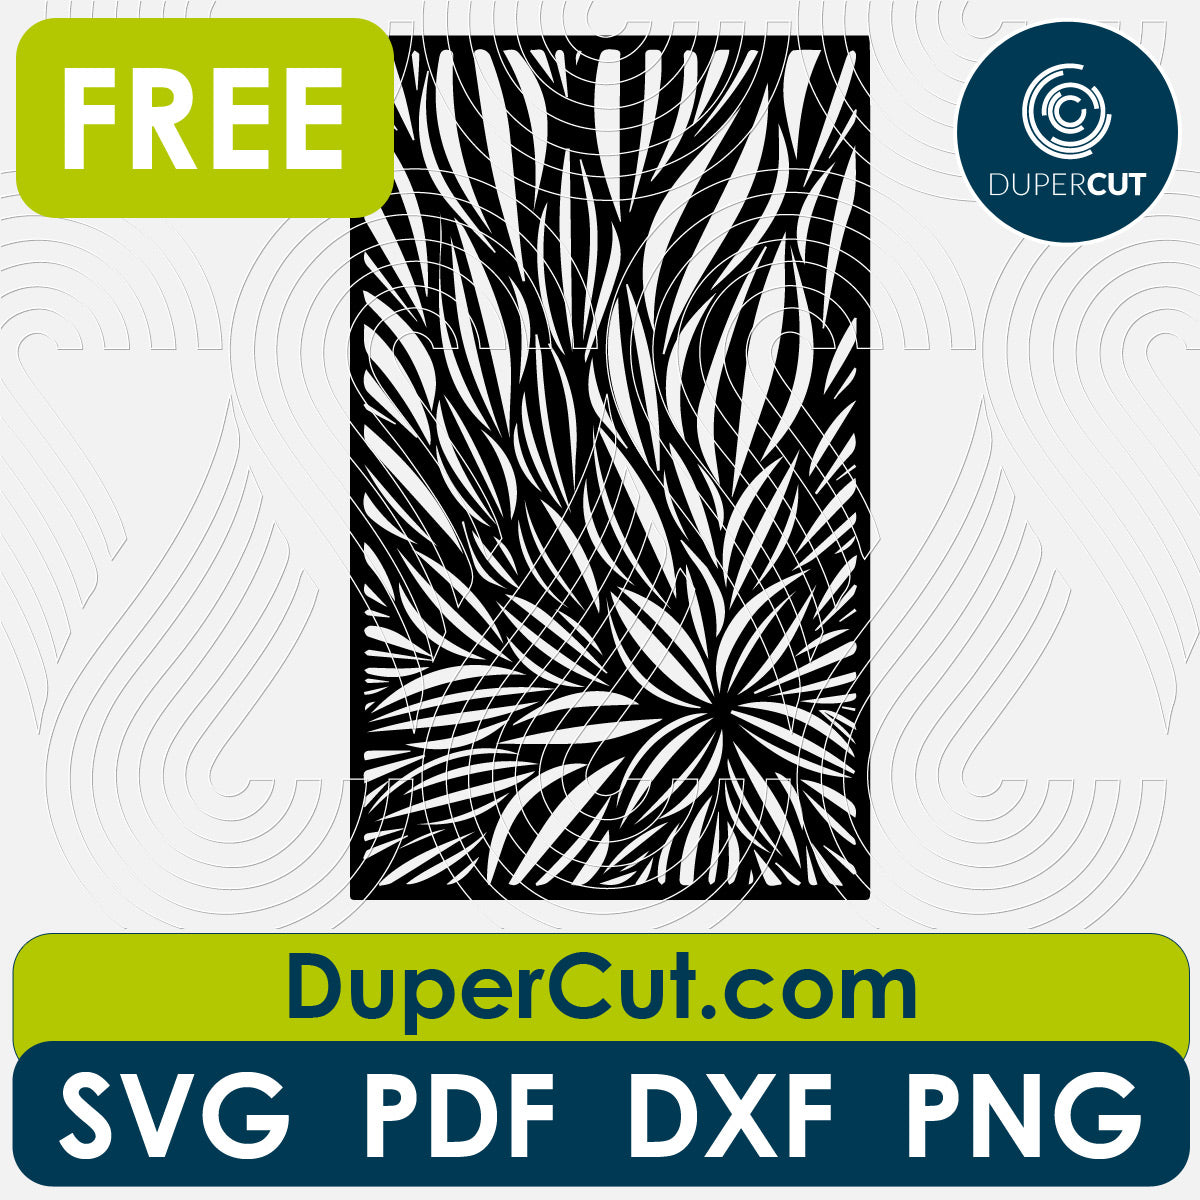 Leaves pattern free cutting template SVG PNG DXF files for Glowforge, Cricut, Silhouette, CNC laser router by DuperCut.com